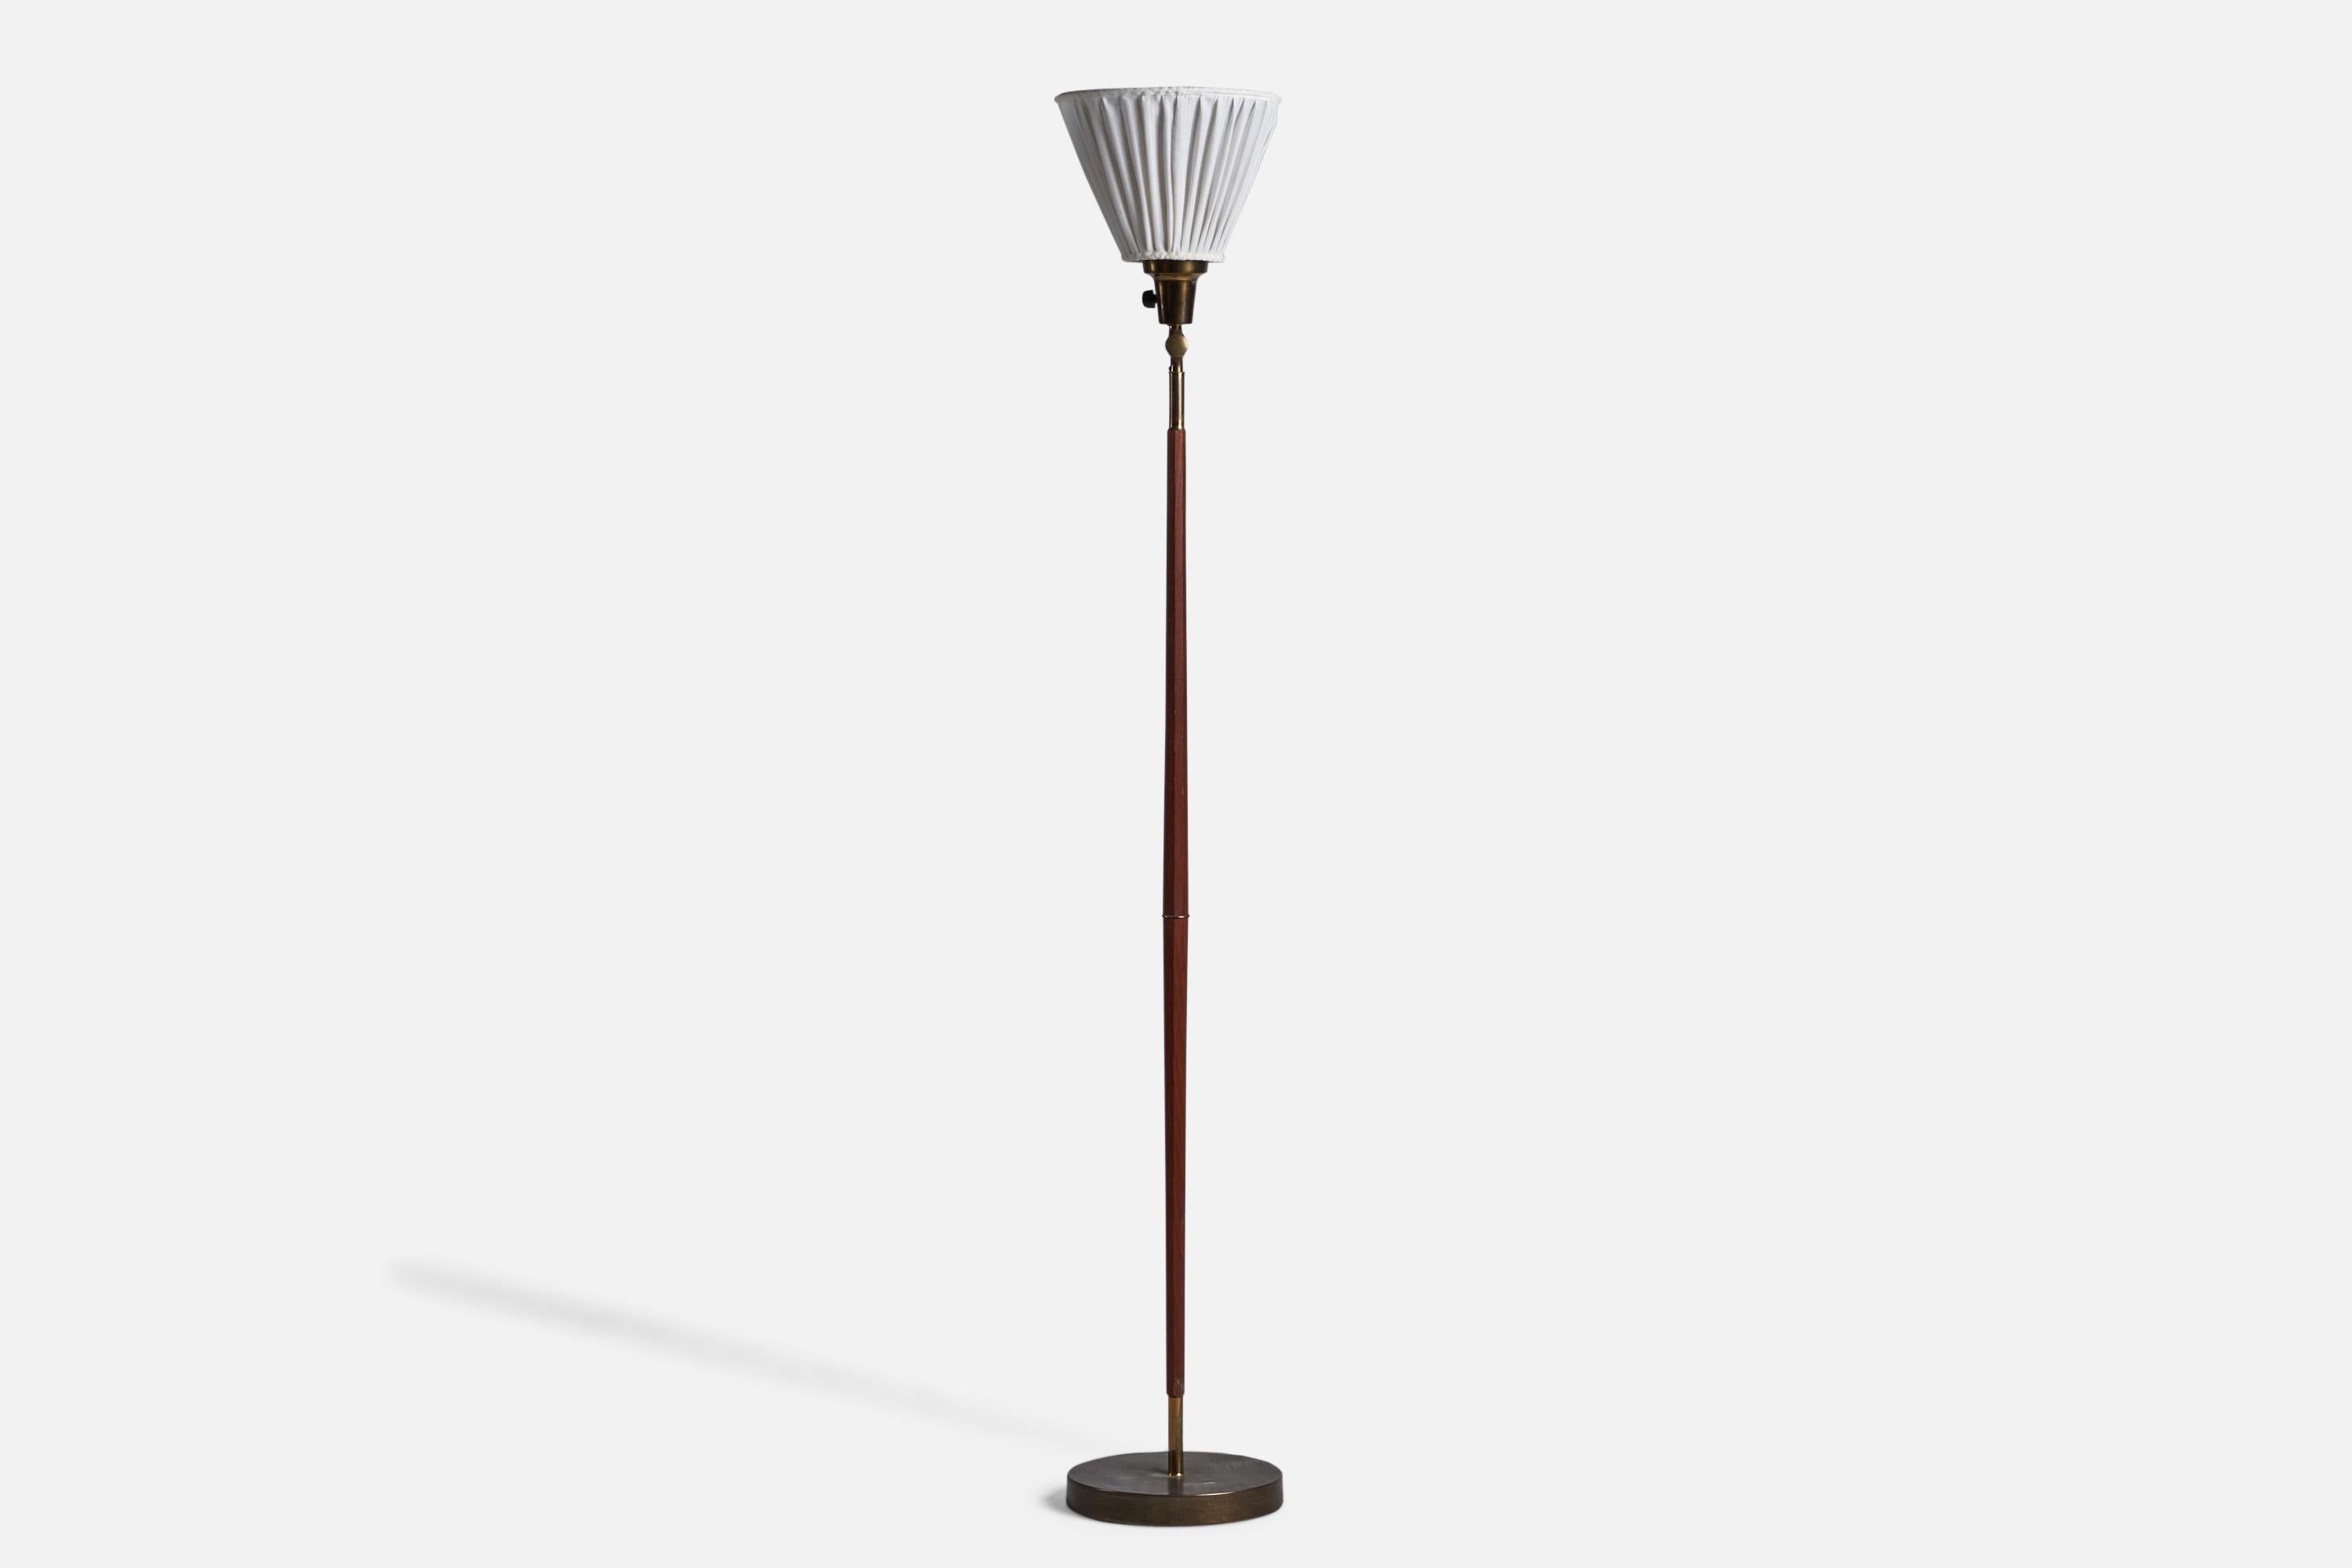 An adjustable teak brass and white fabric floor lamp designed and produced in Sweden, c. 1950s.

Overall Dimensions (inches): 52.5” H x 9.25” W x 16” D
Bulb Specifications: E-26 Bulb
Number of Sockets: 1
All lighting will be converted for US usage.